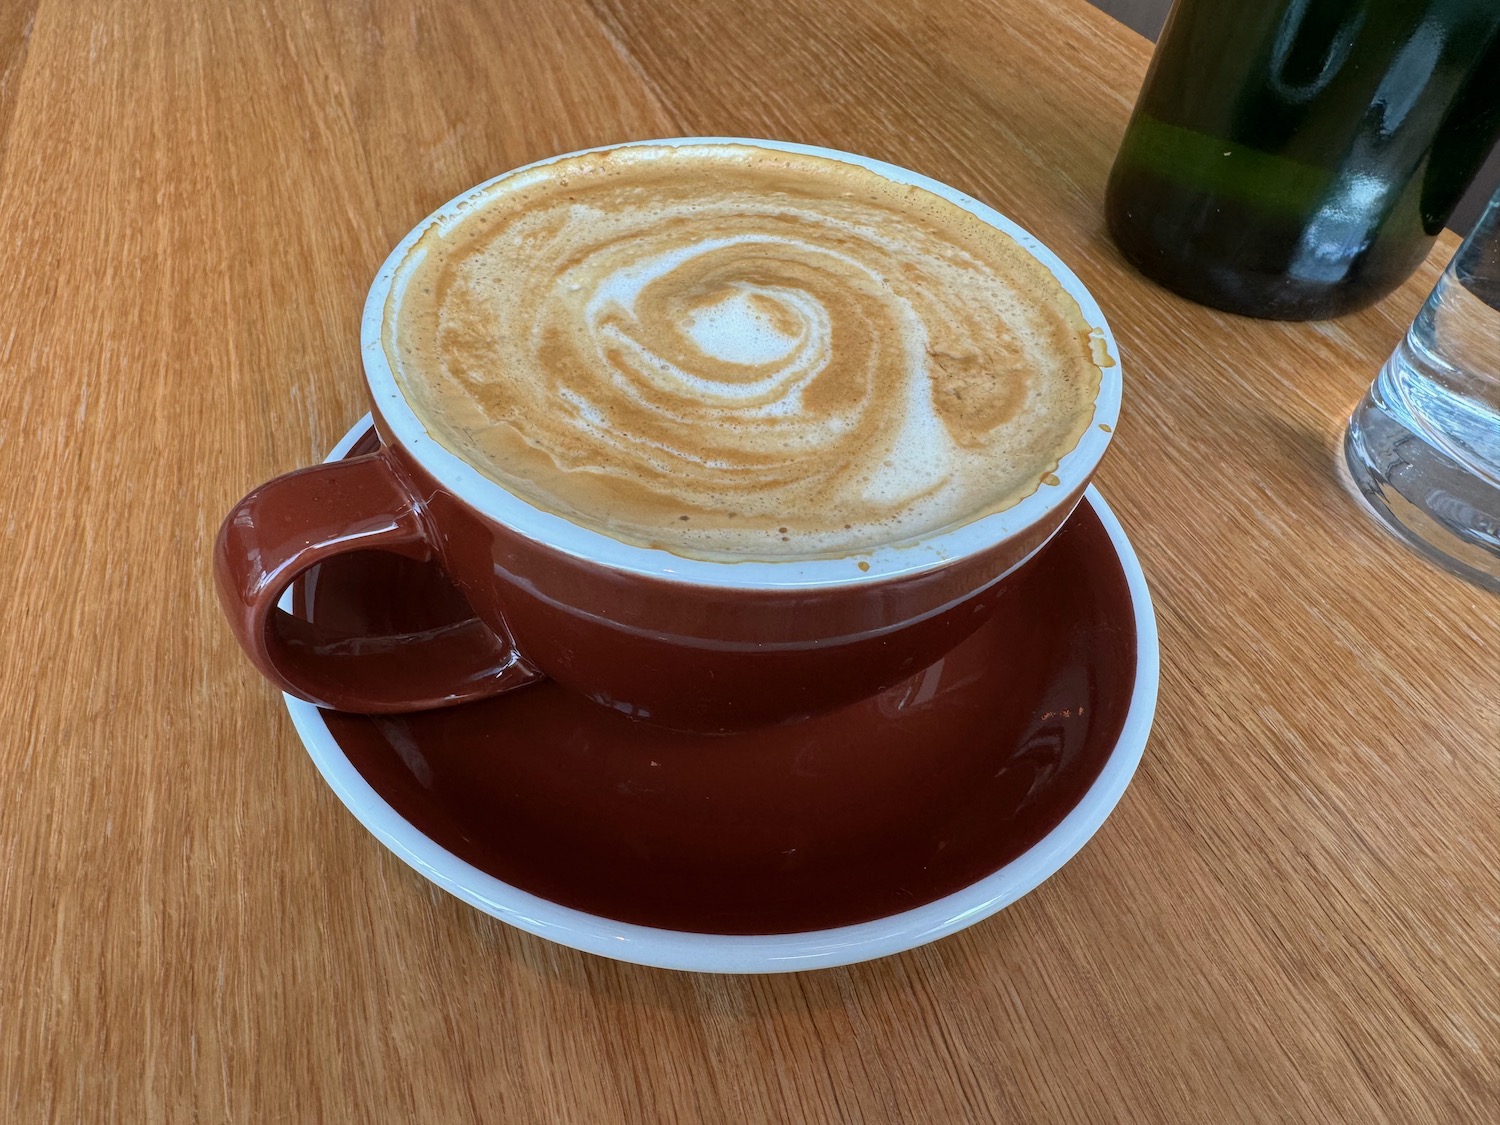 a cup of coffee with a swirl of foam on top